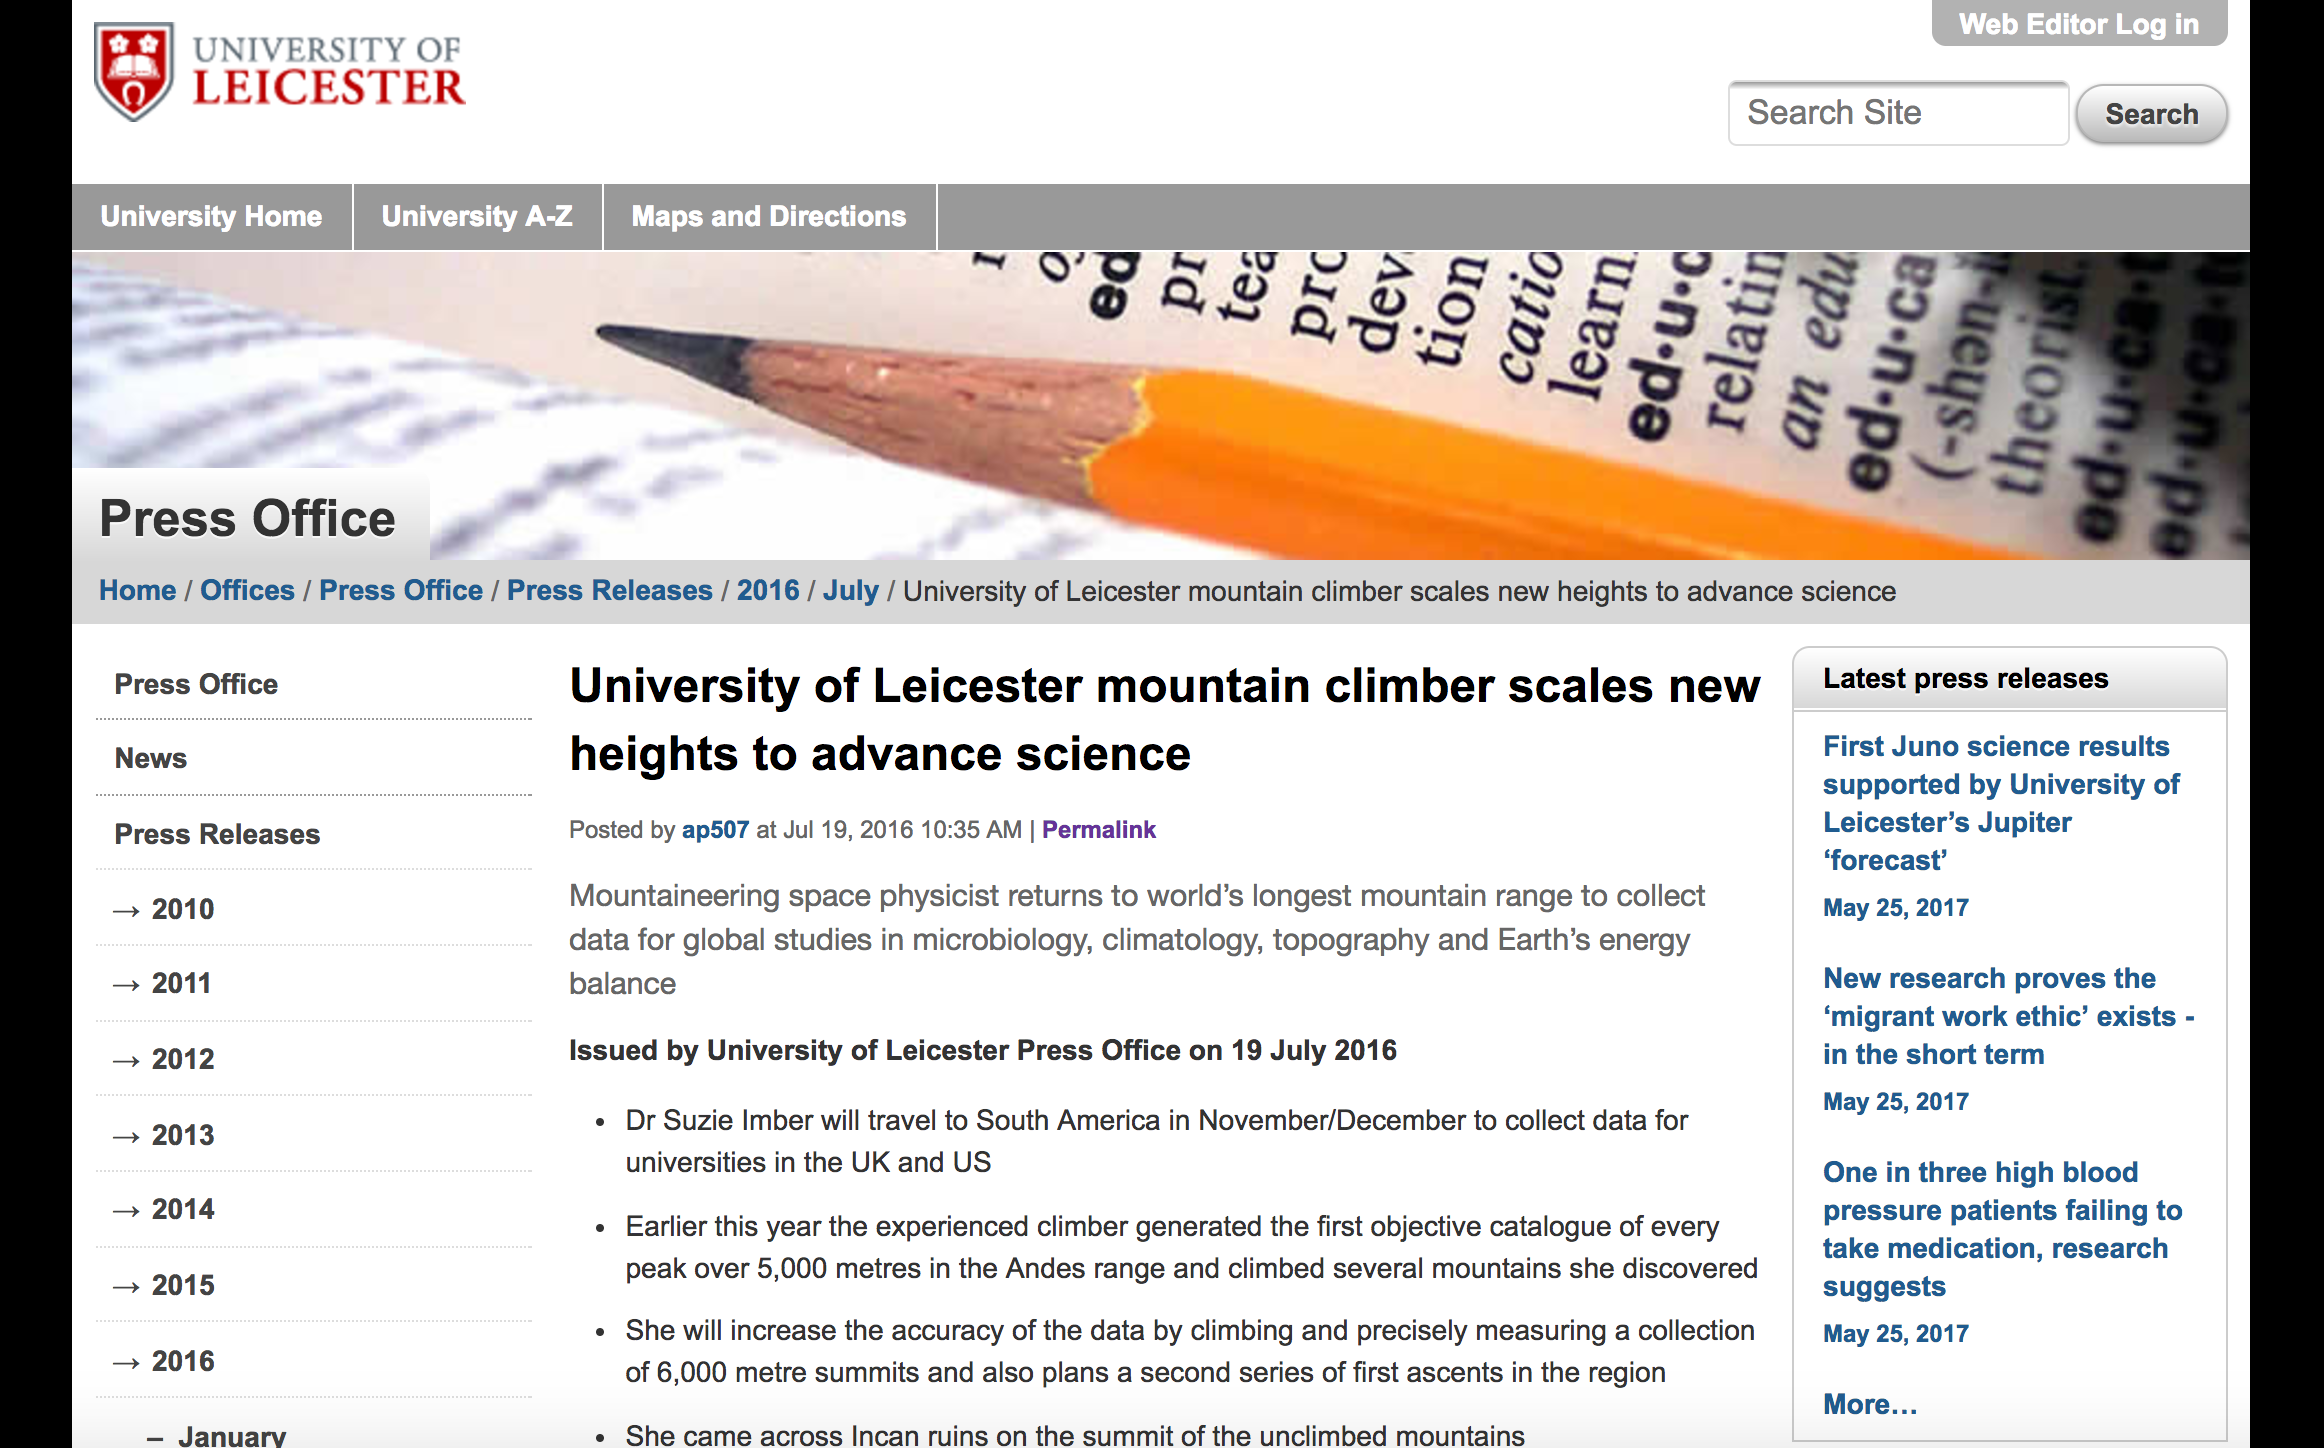 university-of-leicester-mountain-climber-scales-new-heights-to-advance-science